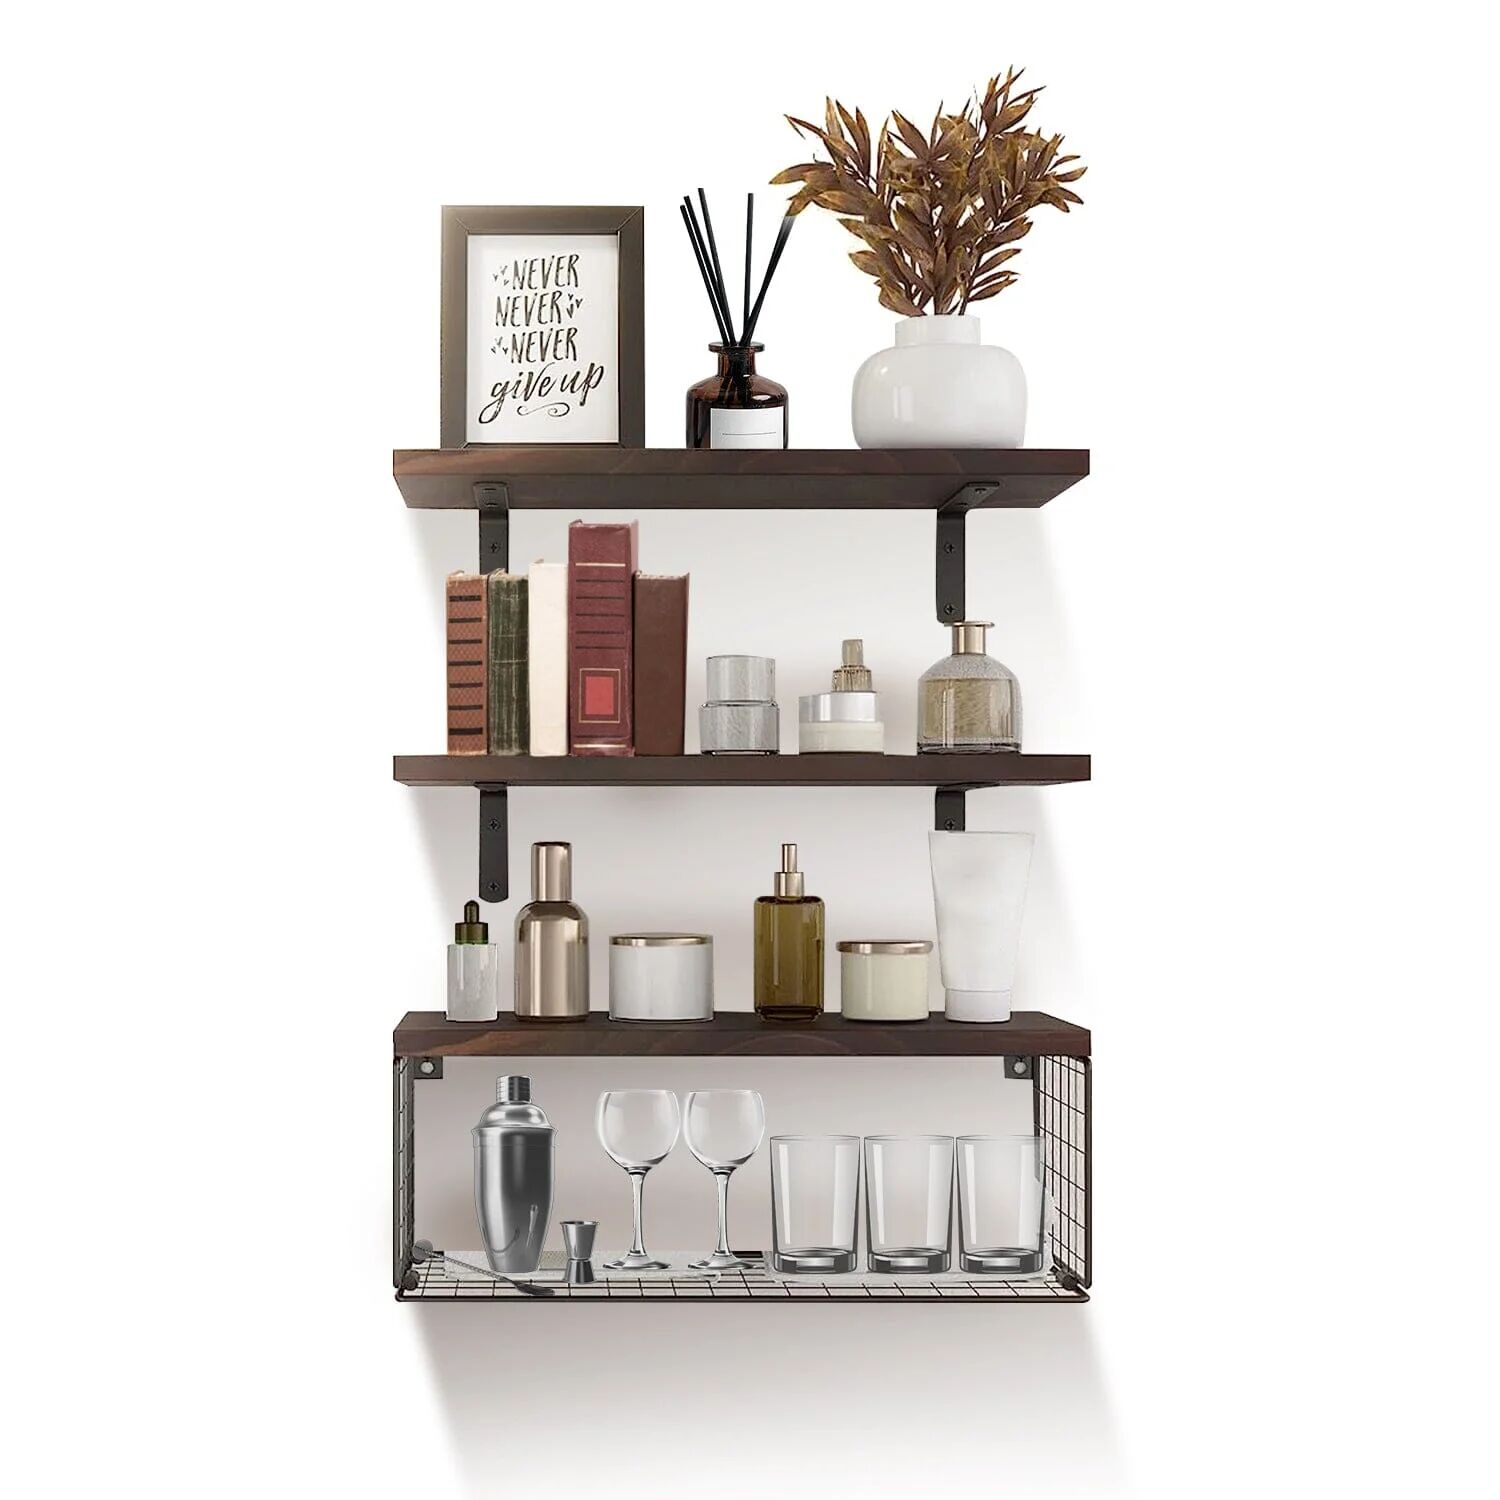 DailySale 2-in-1 Floating Shelves Wall Mounted with Storage Basket